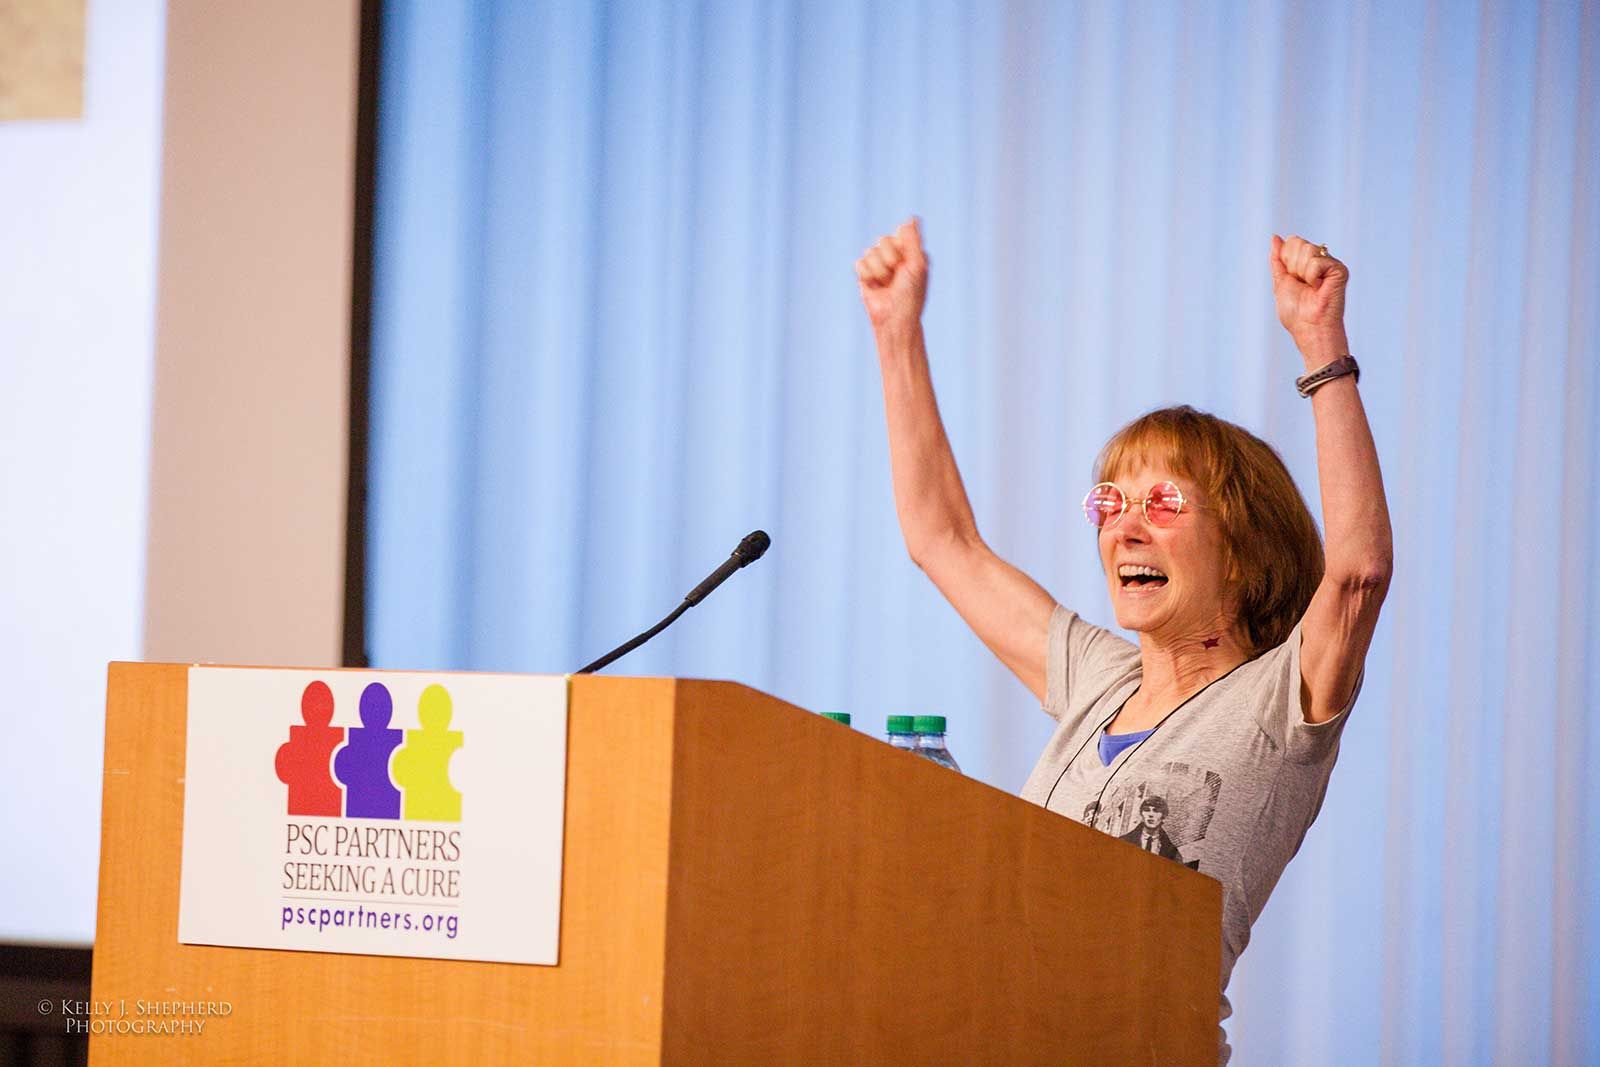 A woman is cheering with her arms in the air. She is standing at a microphone behind a podium that has a PSC Partners logo on the front.